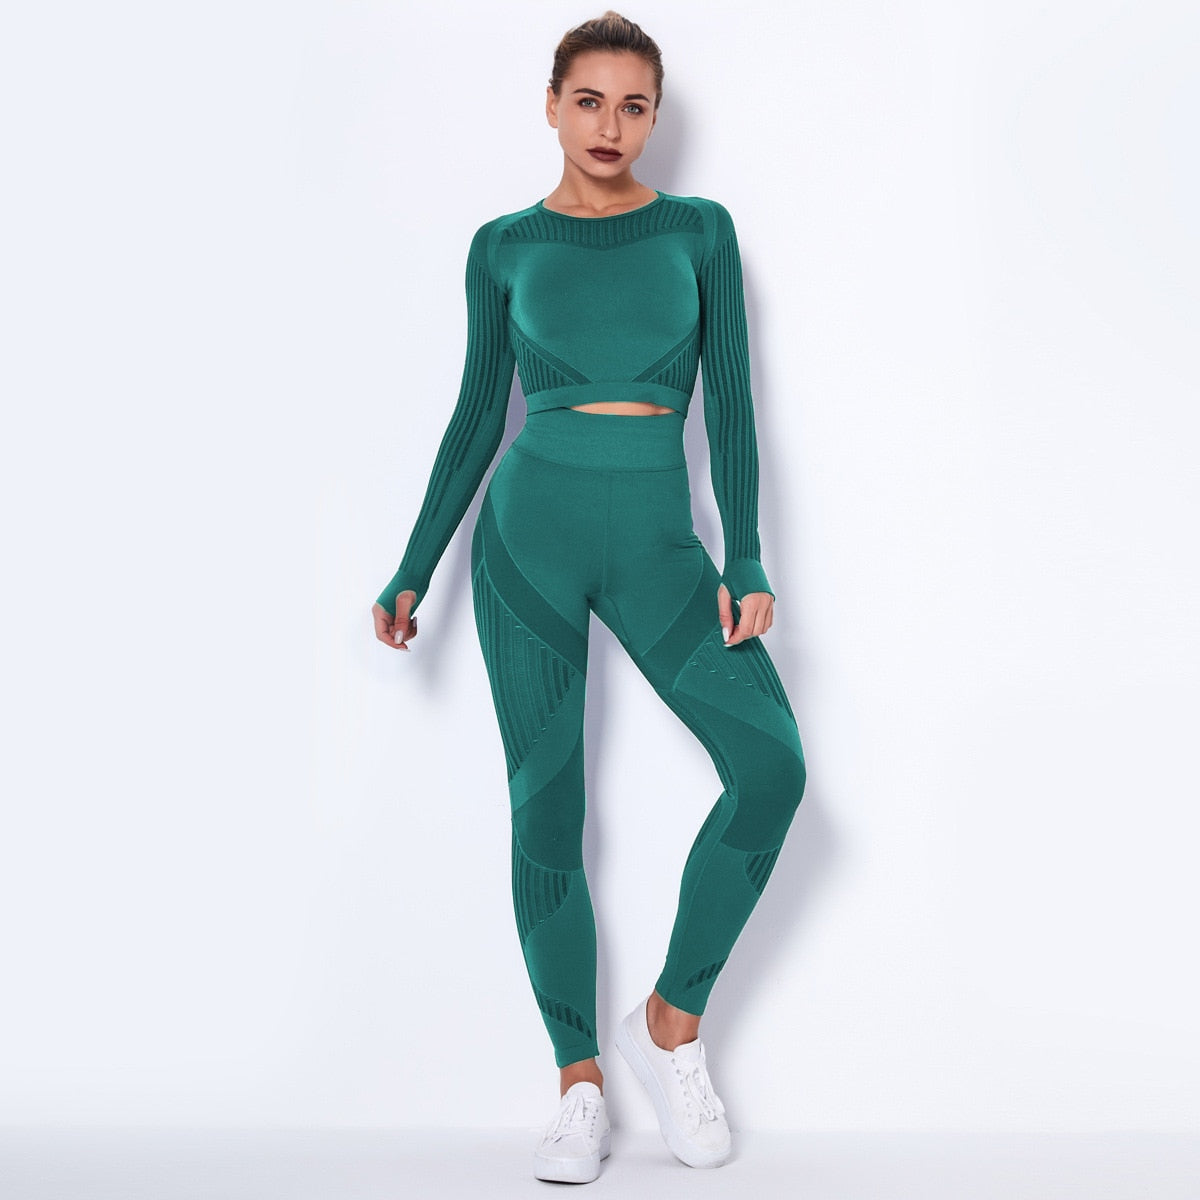 Workout Sets For Women 2 Piece Seamless Yoga Outfit Tracksuit High Waisted Yoga Leggings And Crop Top Gym Clothes Set greenL  109.99 EZYSELLA SHOP